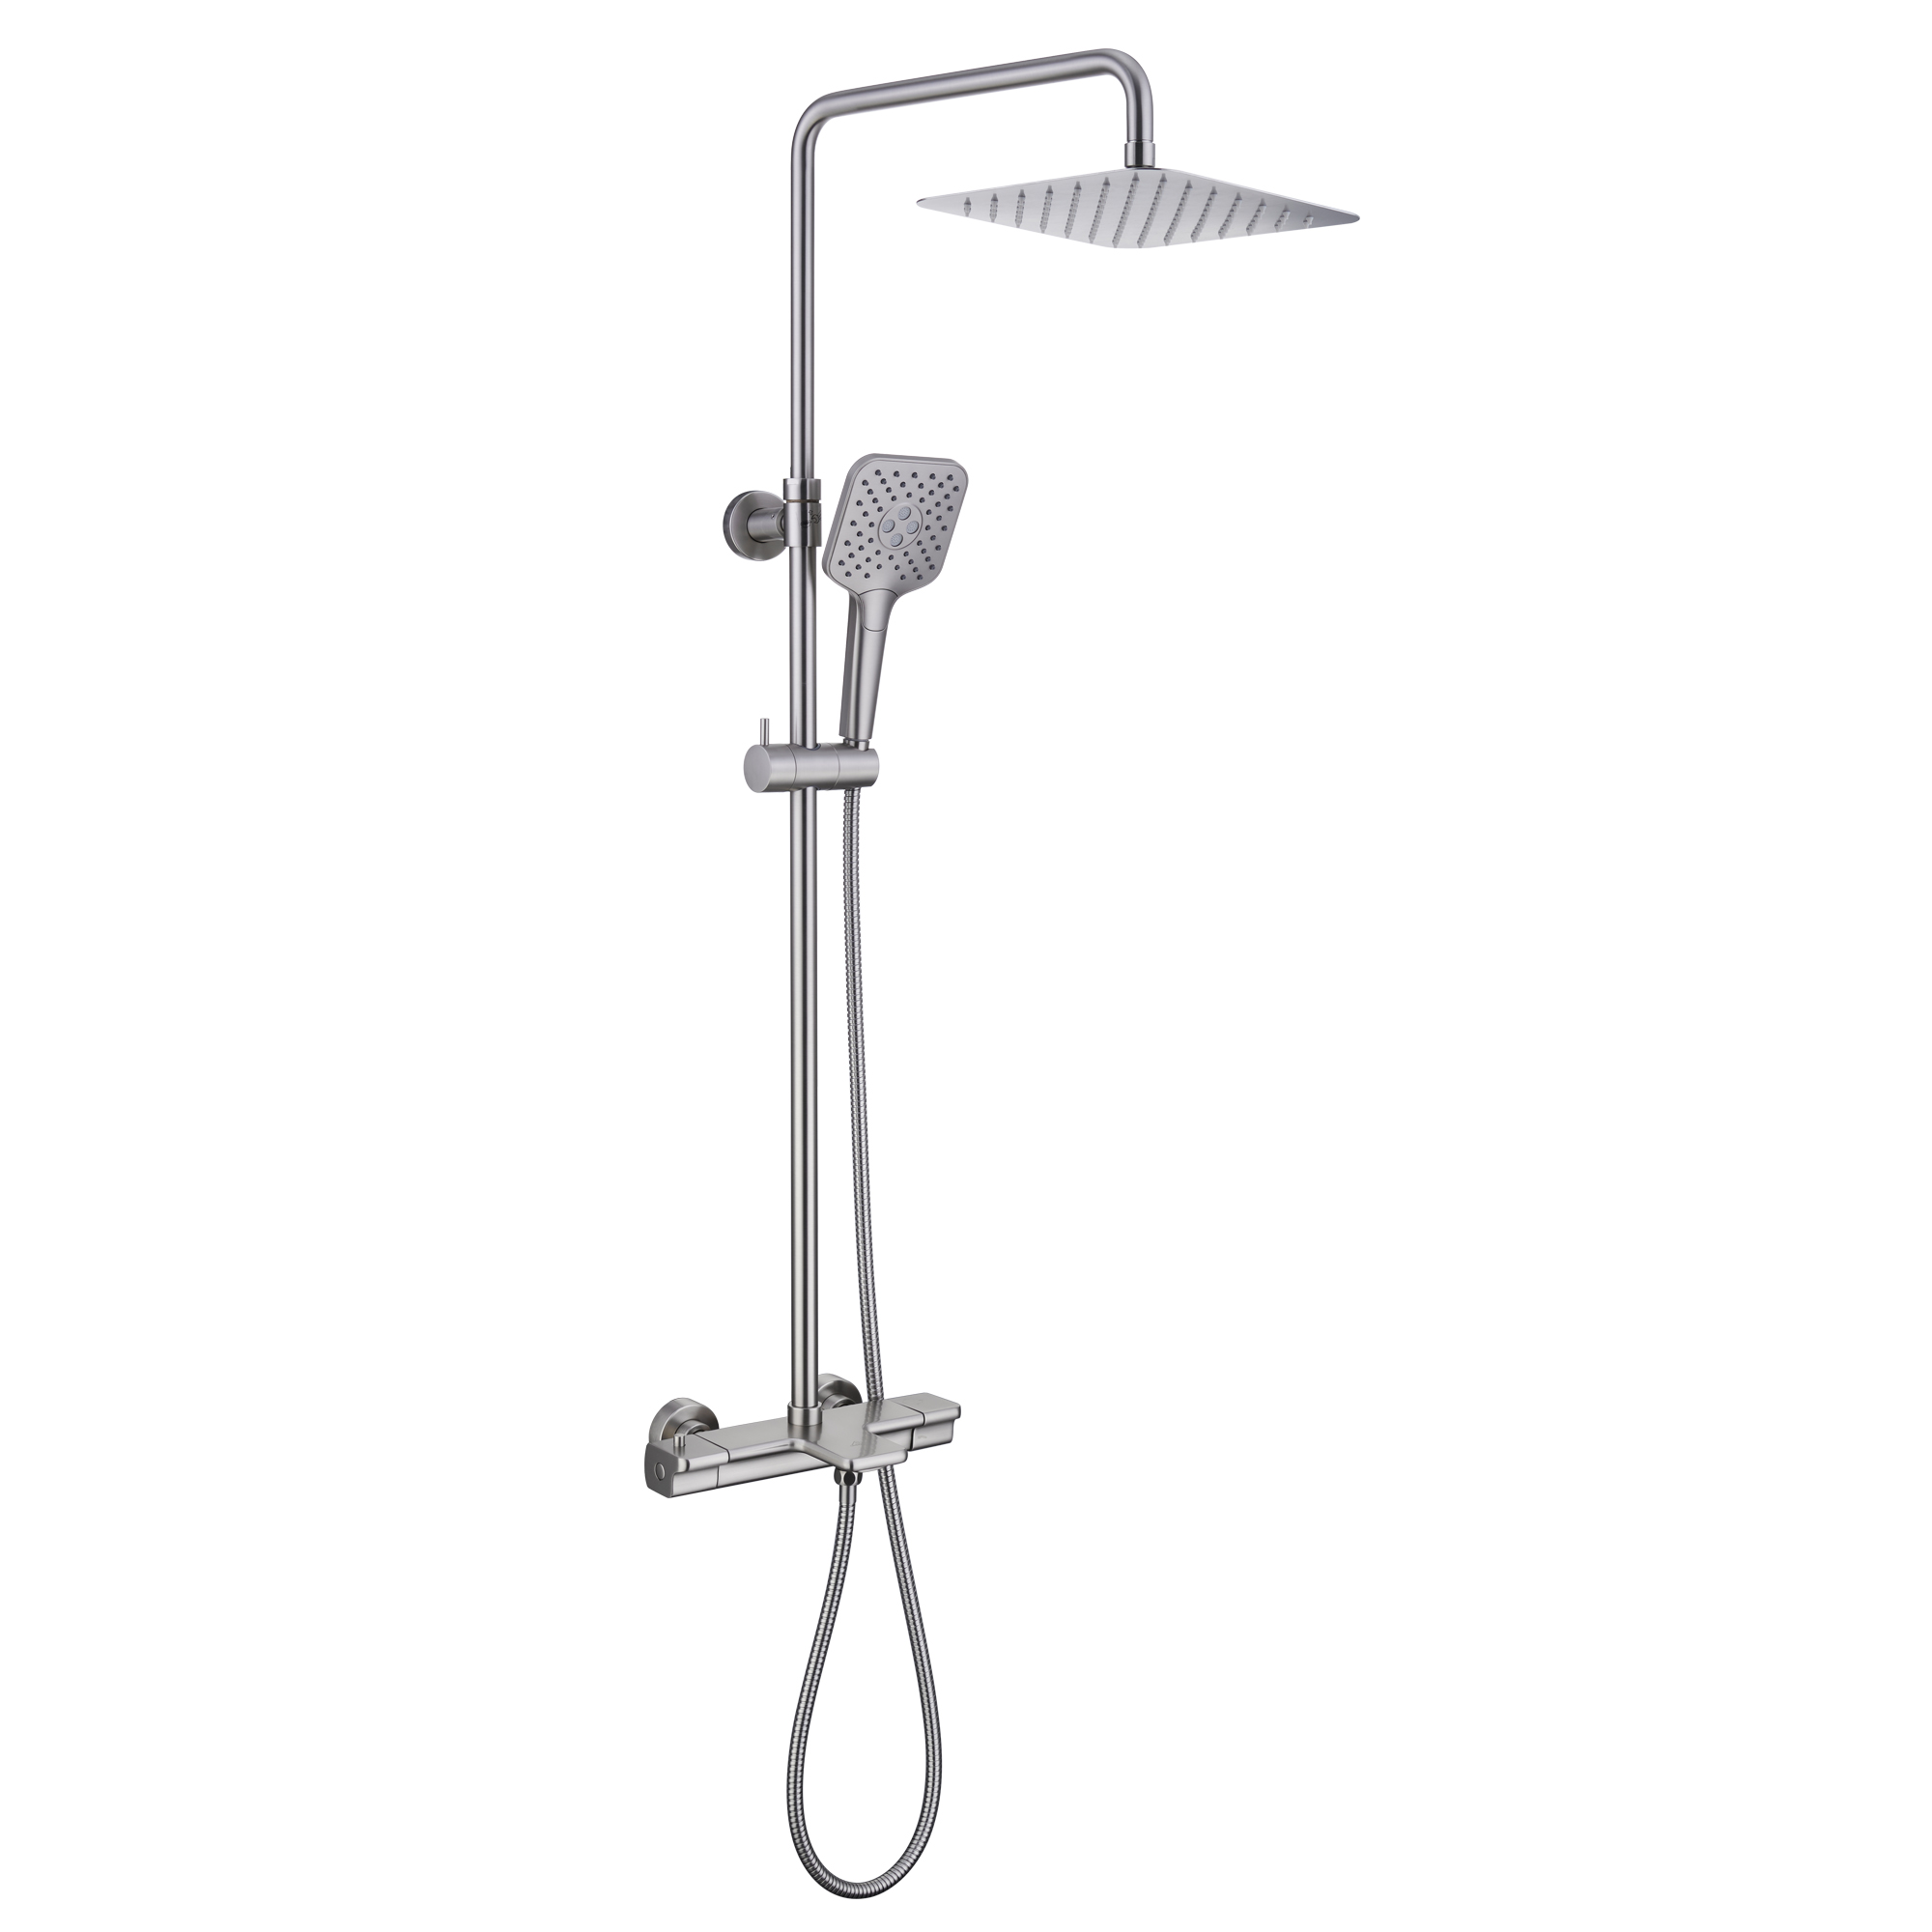 9.8"*9.8" Thermostatic rain shower faucet  in brushed nickel-CASAINC